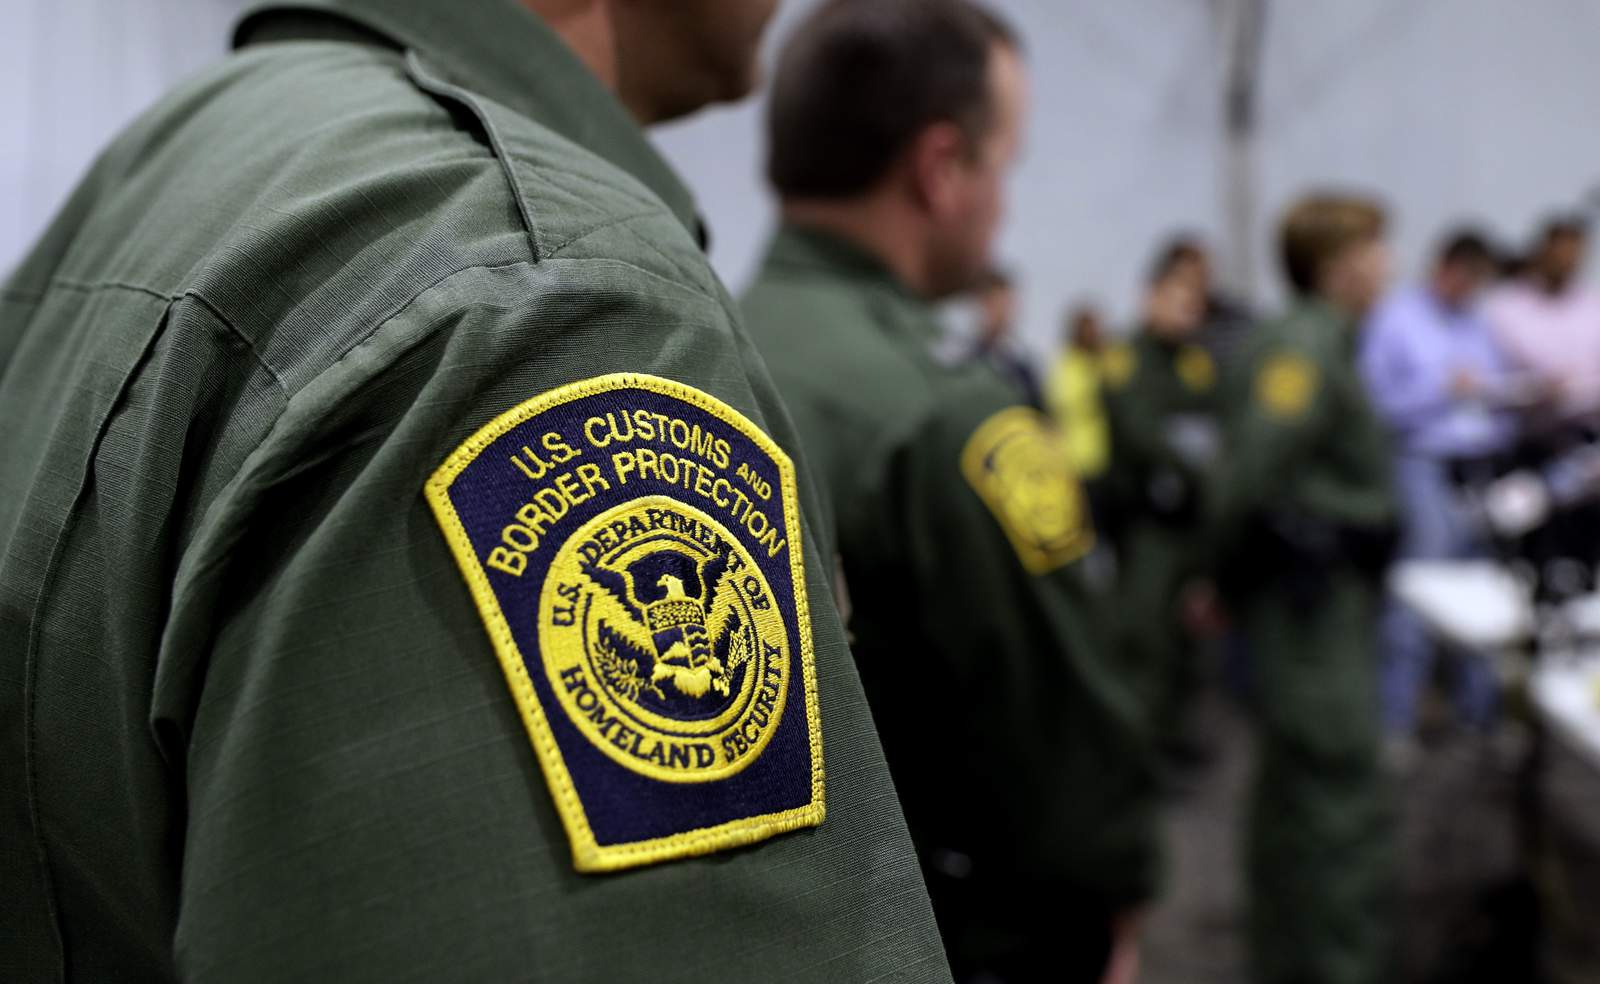 Children packed into Border Patrol tent for days on end